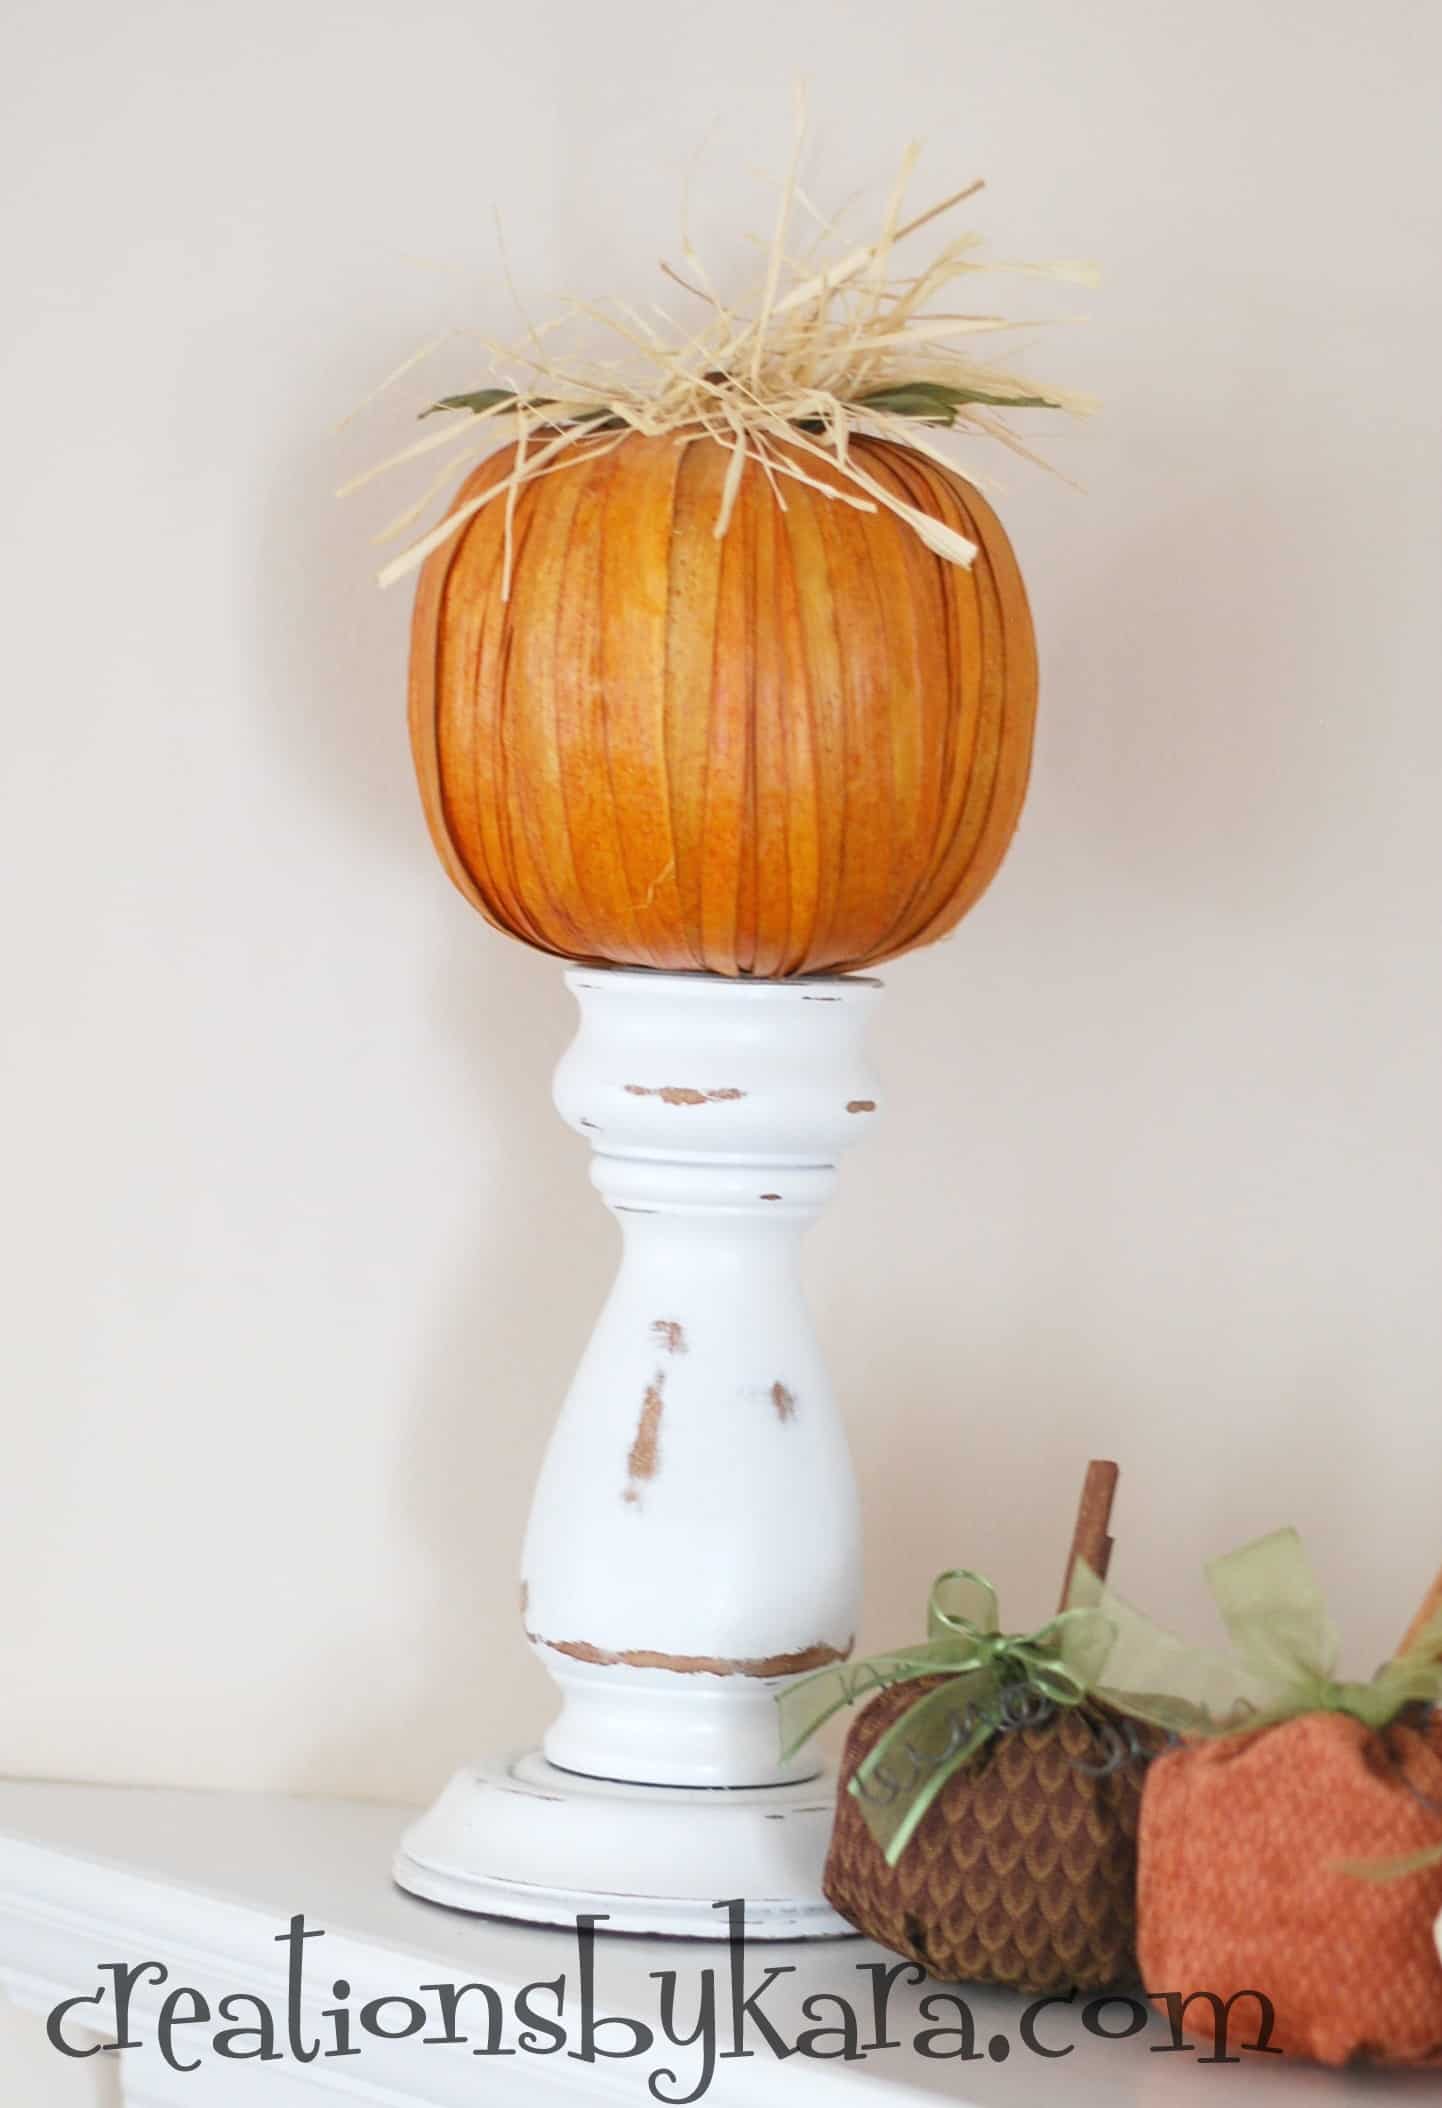 Wrapped pumkins on candle pedestals